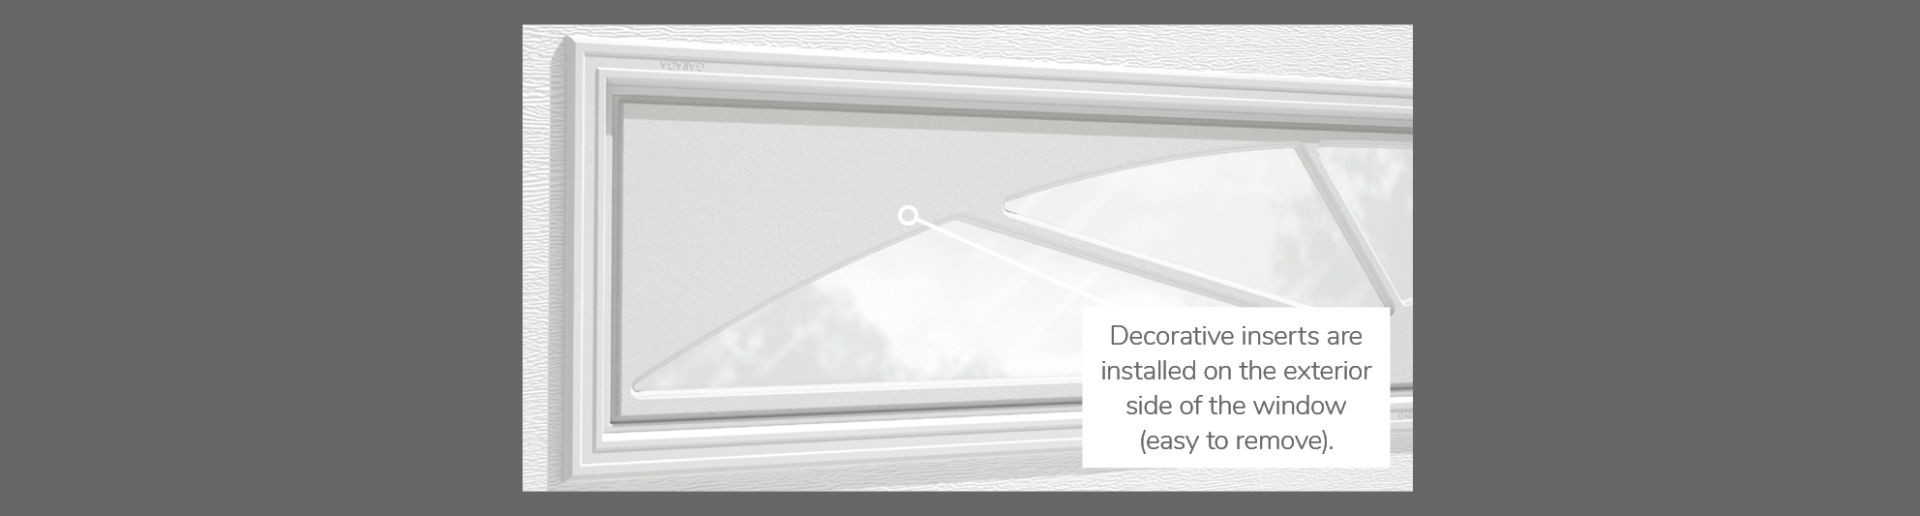 Williamsburg Decorative Insert, 40" x 13", available for door R-16, R-12, 2 layers - Polystyrene and Non-insulated